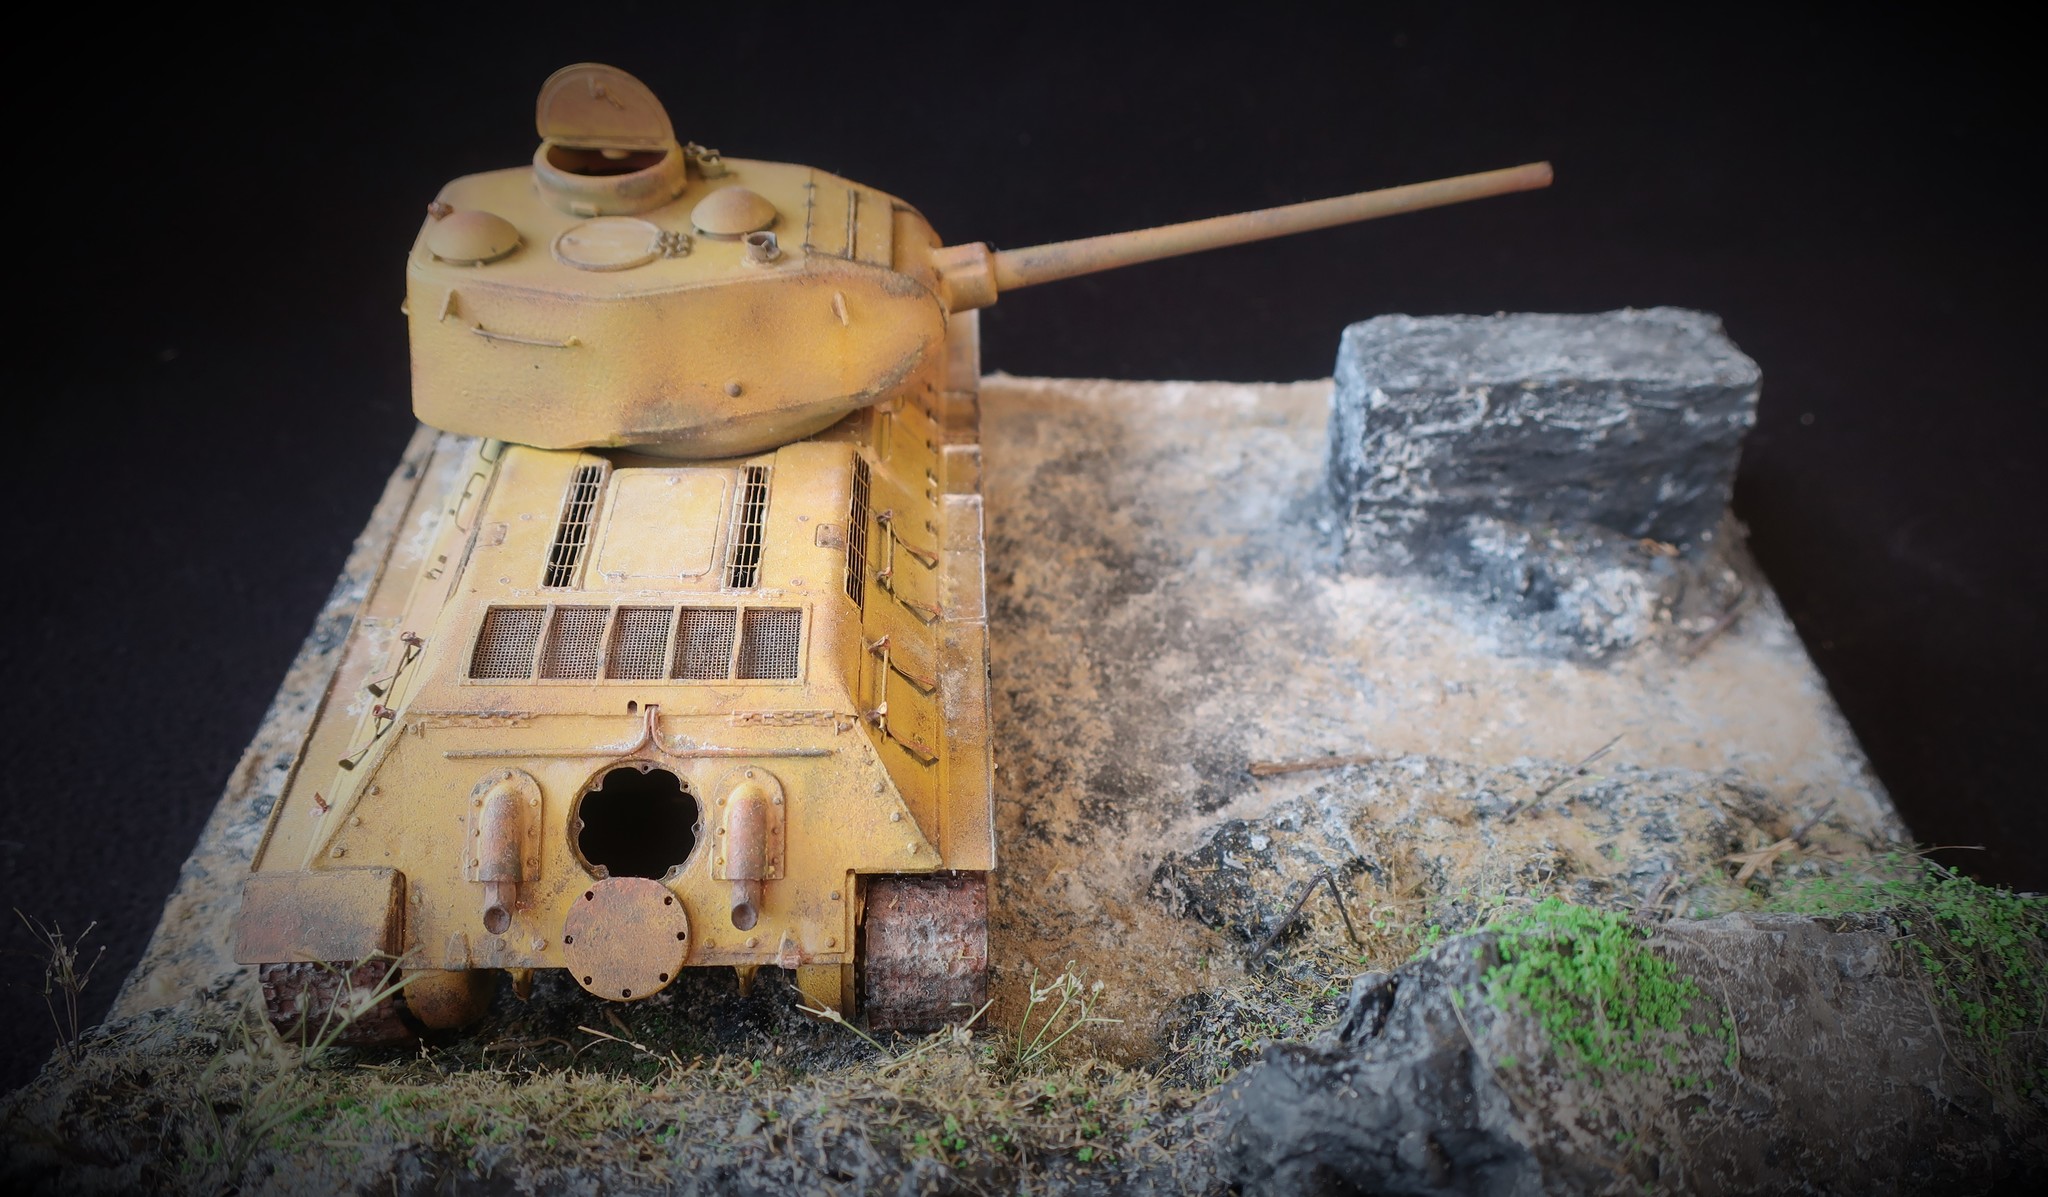 Diorama Angola T-34/85 1/35 - My, Tanks, Stand modeling, Scale model, Modeling, Painting miniatures, Collecting, The Second World War, Diorama, T-34, Video, Longpost